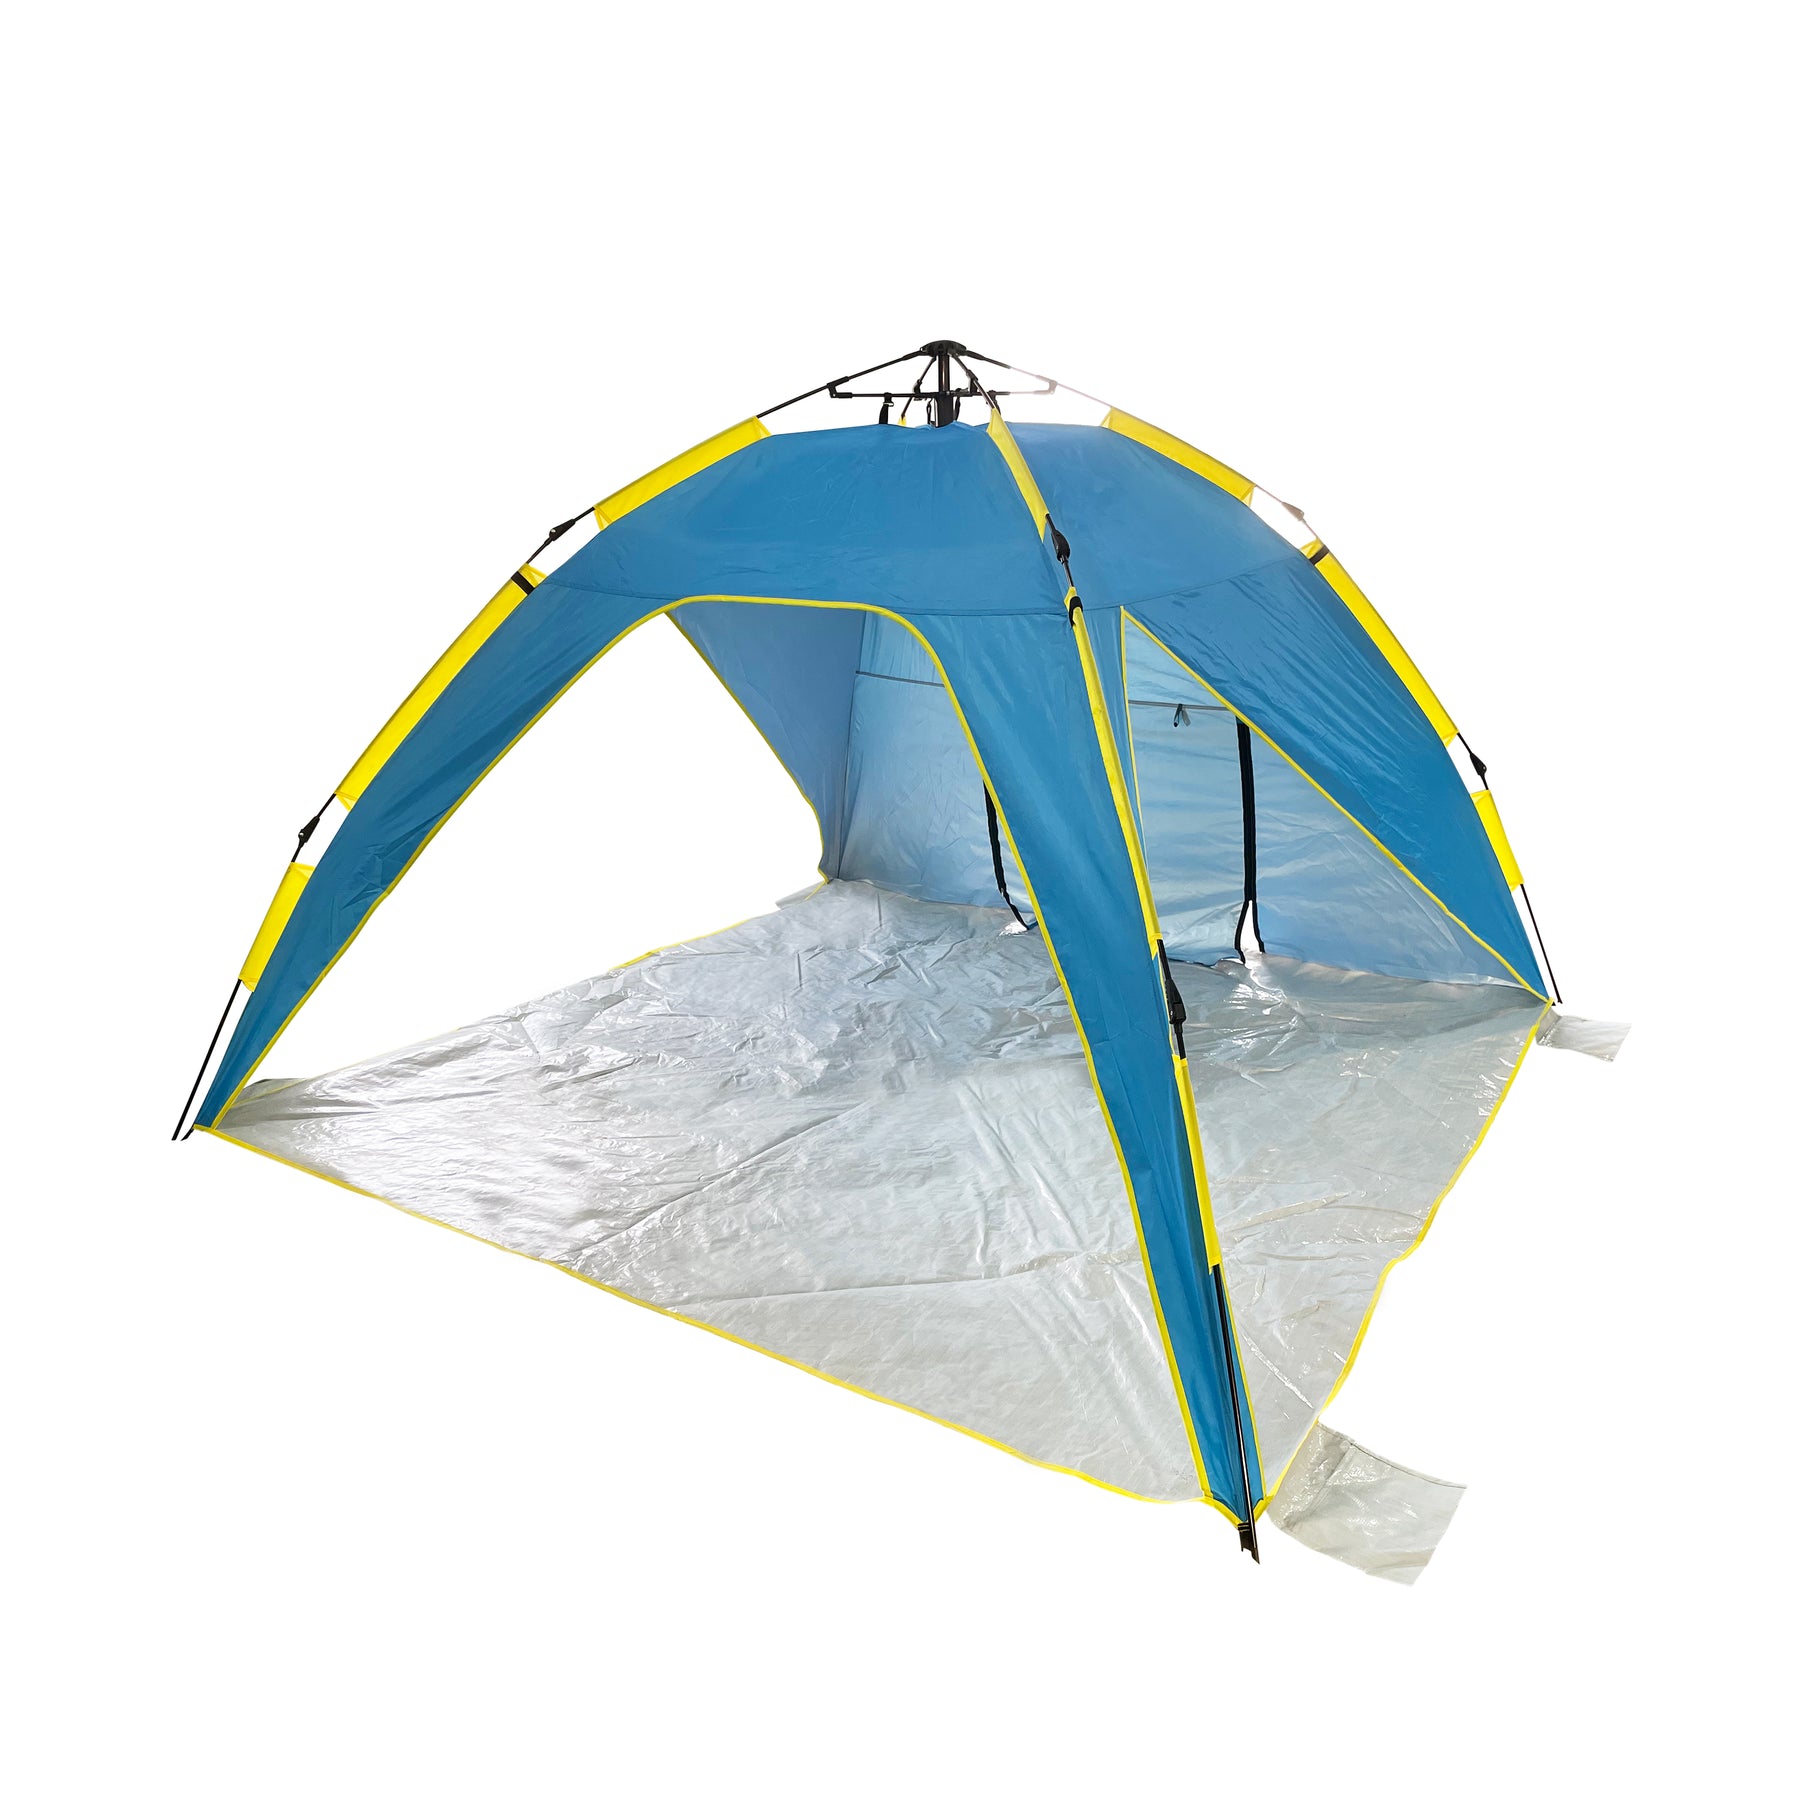 Bliss Hammocks Pop-Up Beach Tent With Carry Bag in the Blue and Yellow variation.